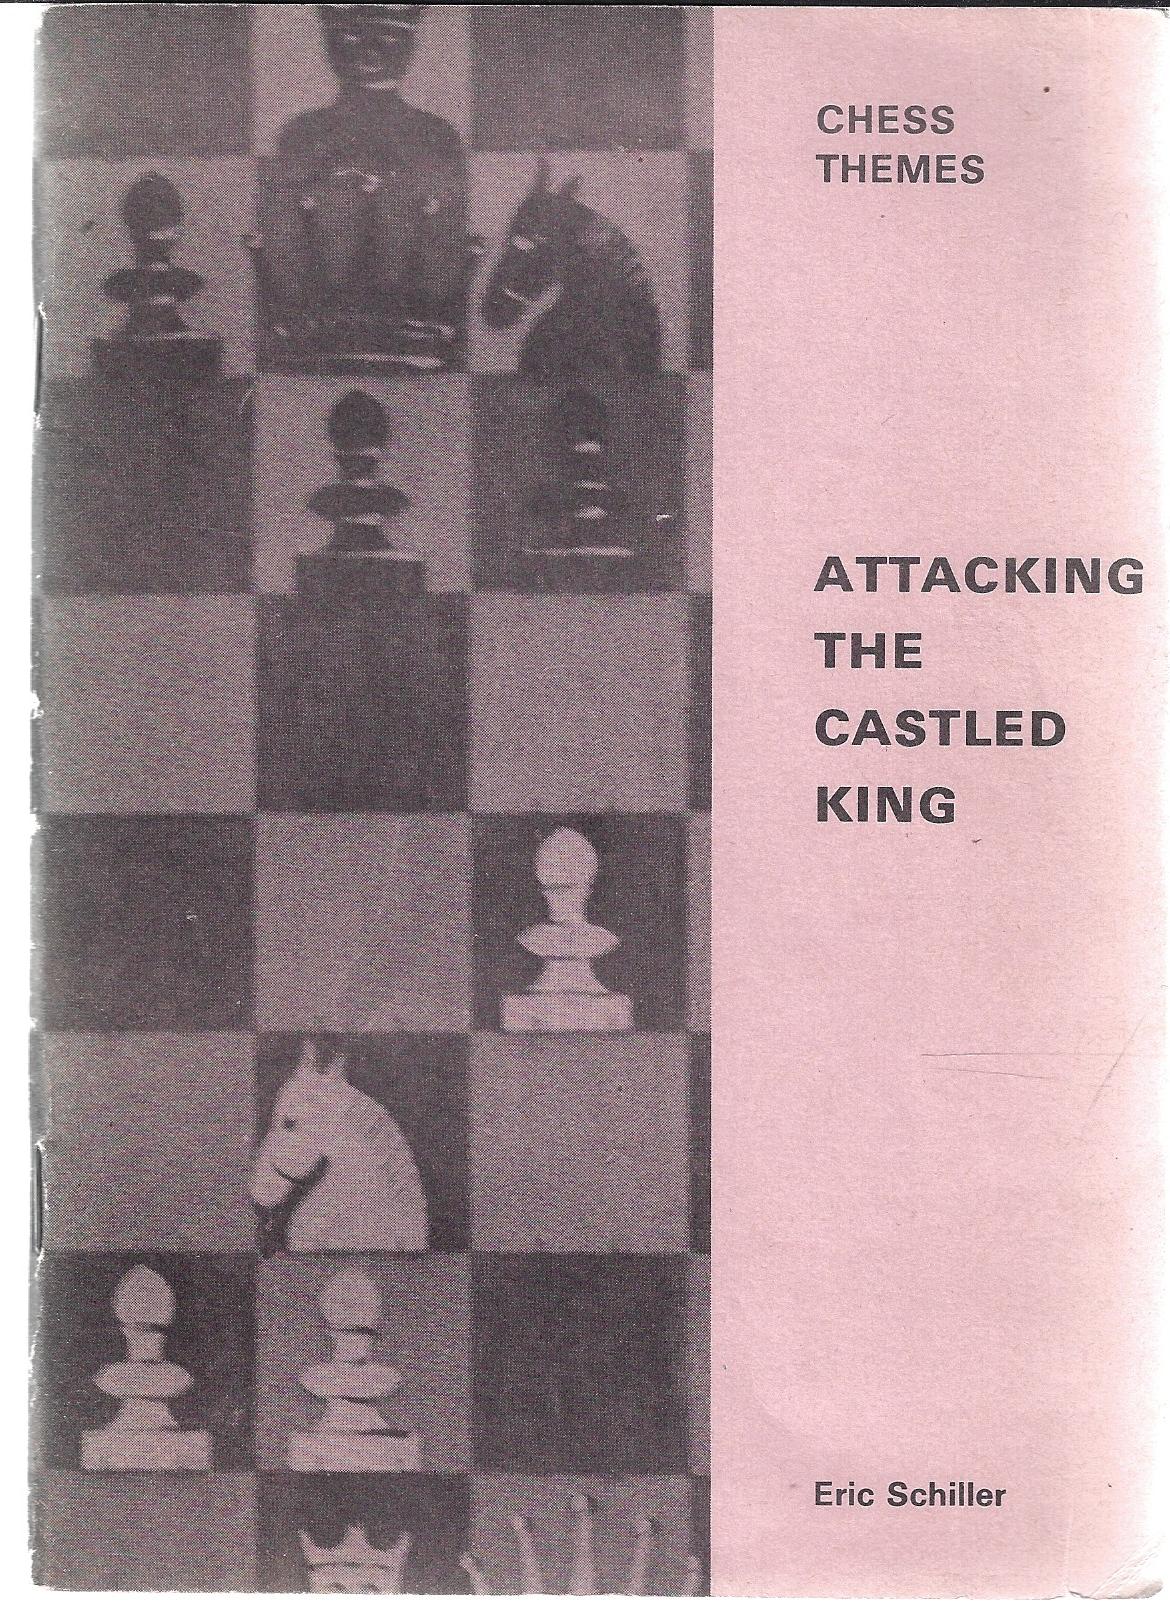 Complete Defense to Queen Pawn Openings by Eric Schiller Paperback - Chess  Book